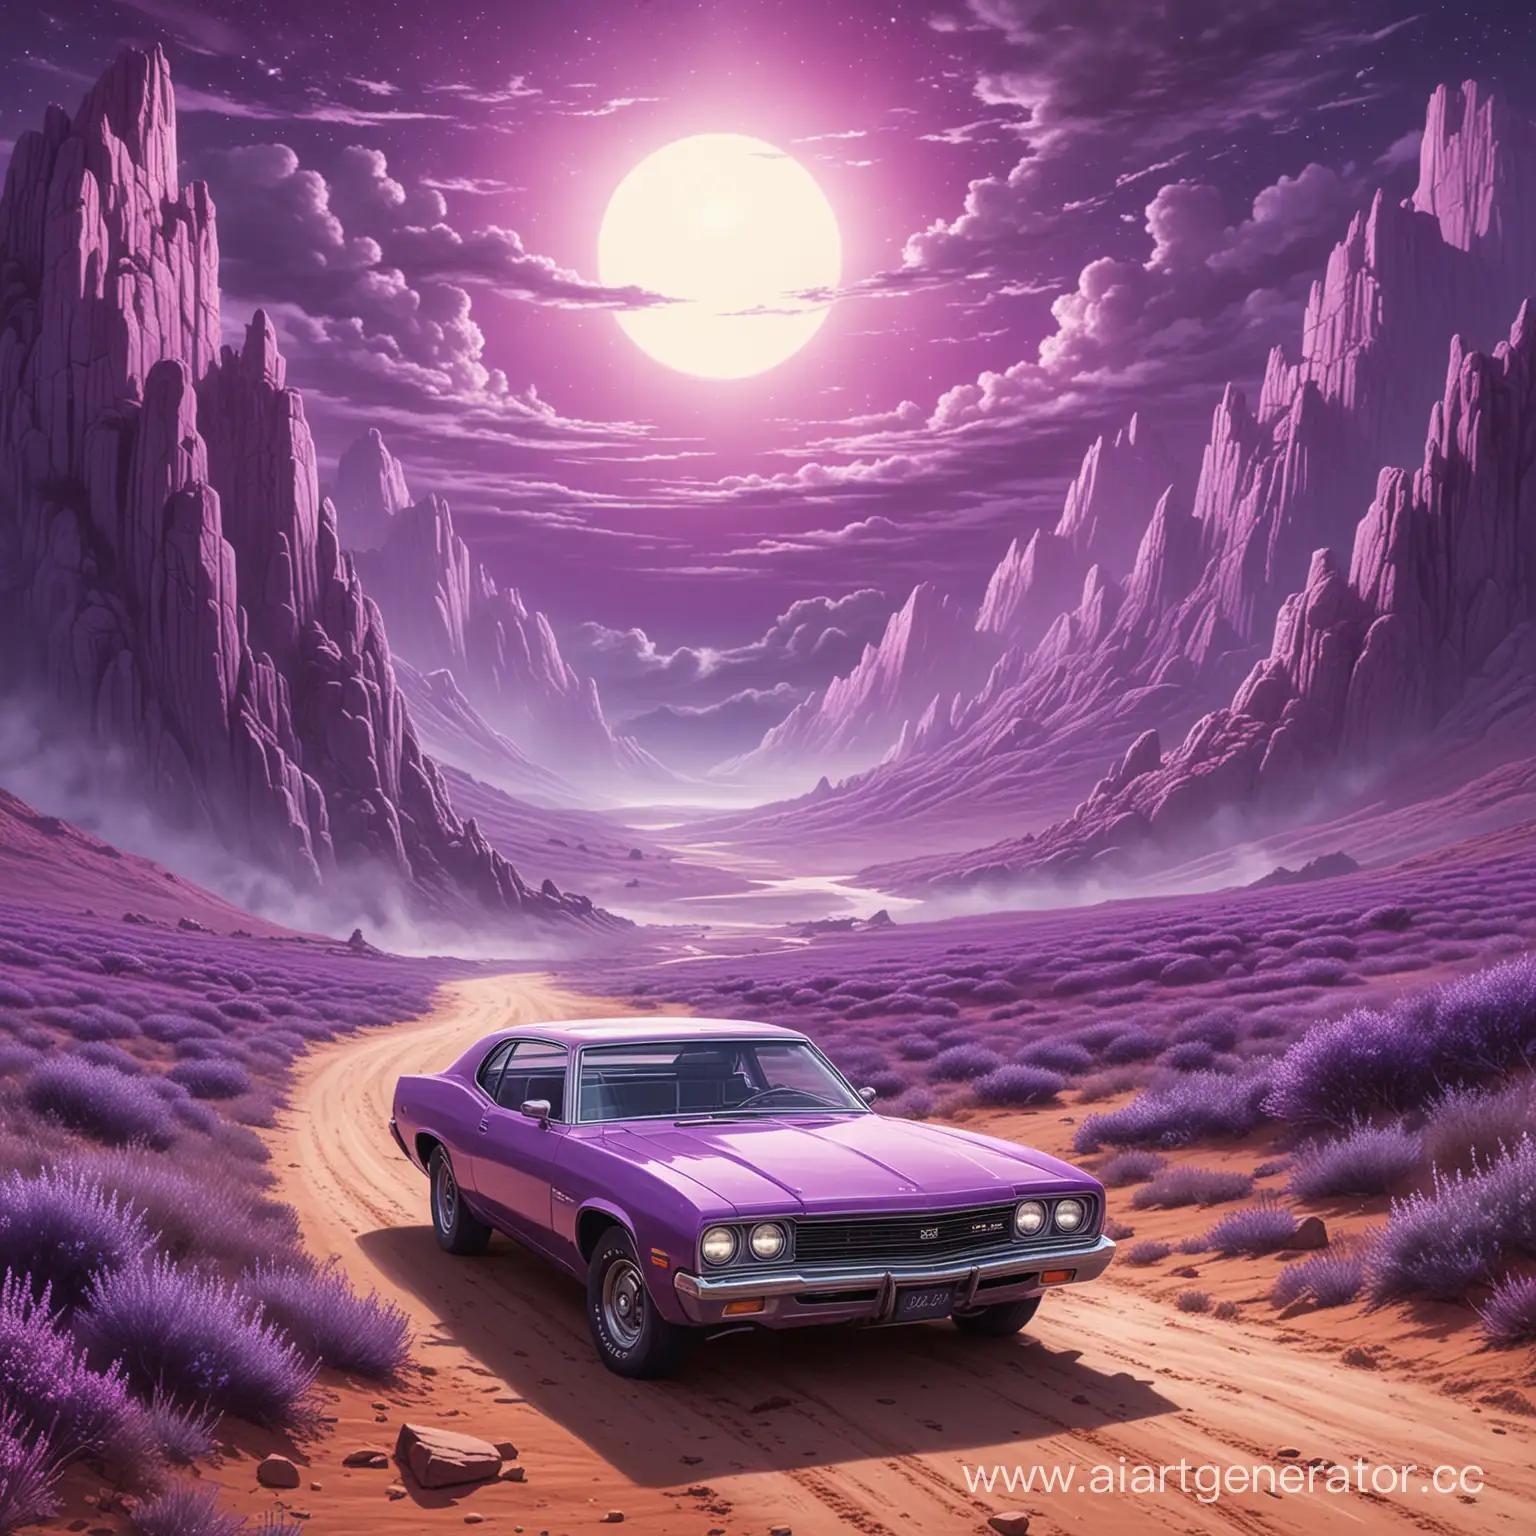 Purple-Car-Nostalgia-Vintage-Vehicle-in-Shades-of-Purple-for-Echoes-of-Serenity-Track-Cover